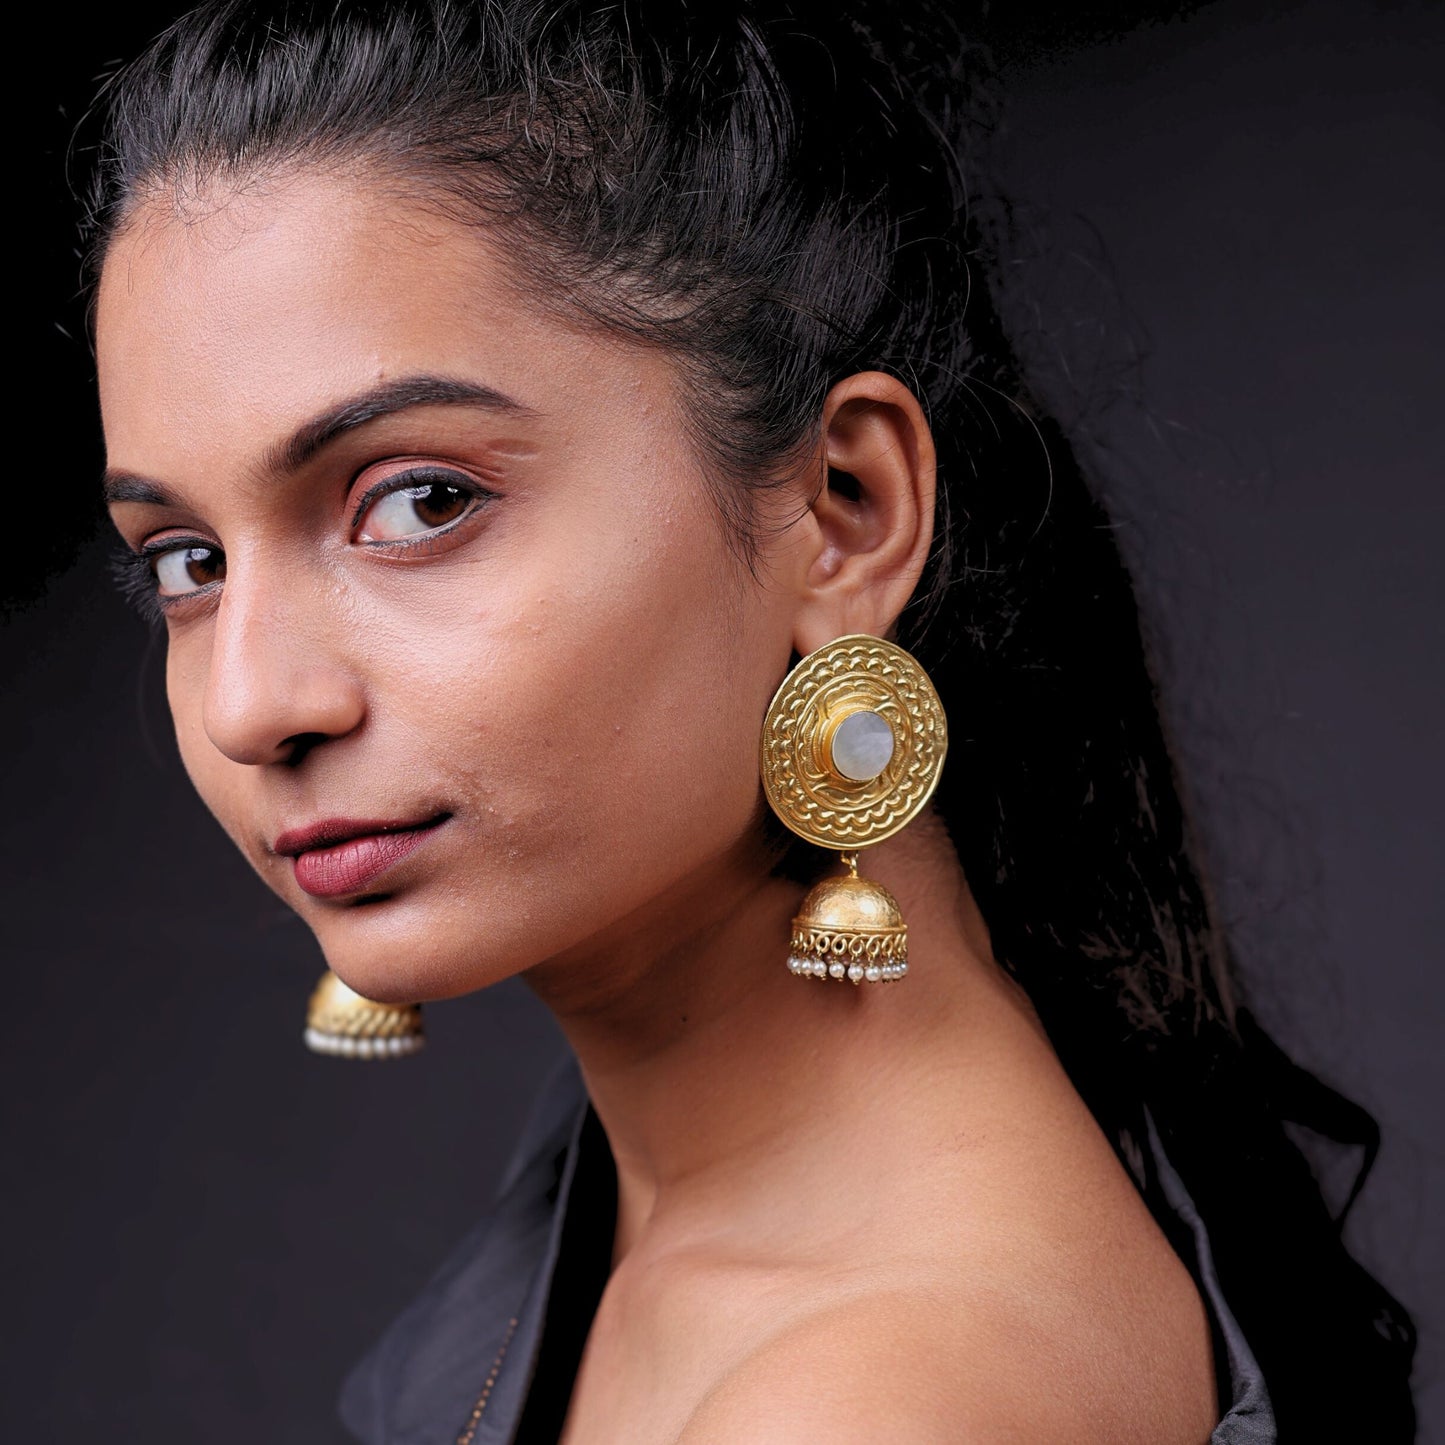 Bdiva 18K Gold Plated Intricately Carved Jhumka Earrings with Mother of Pearl.